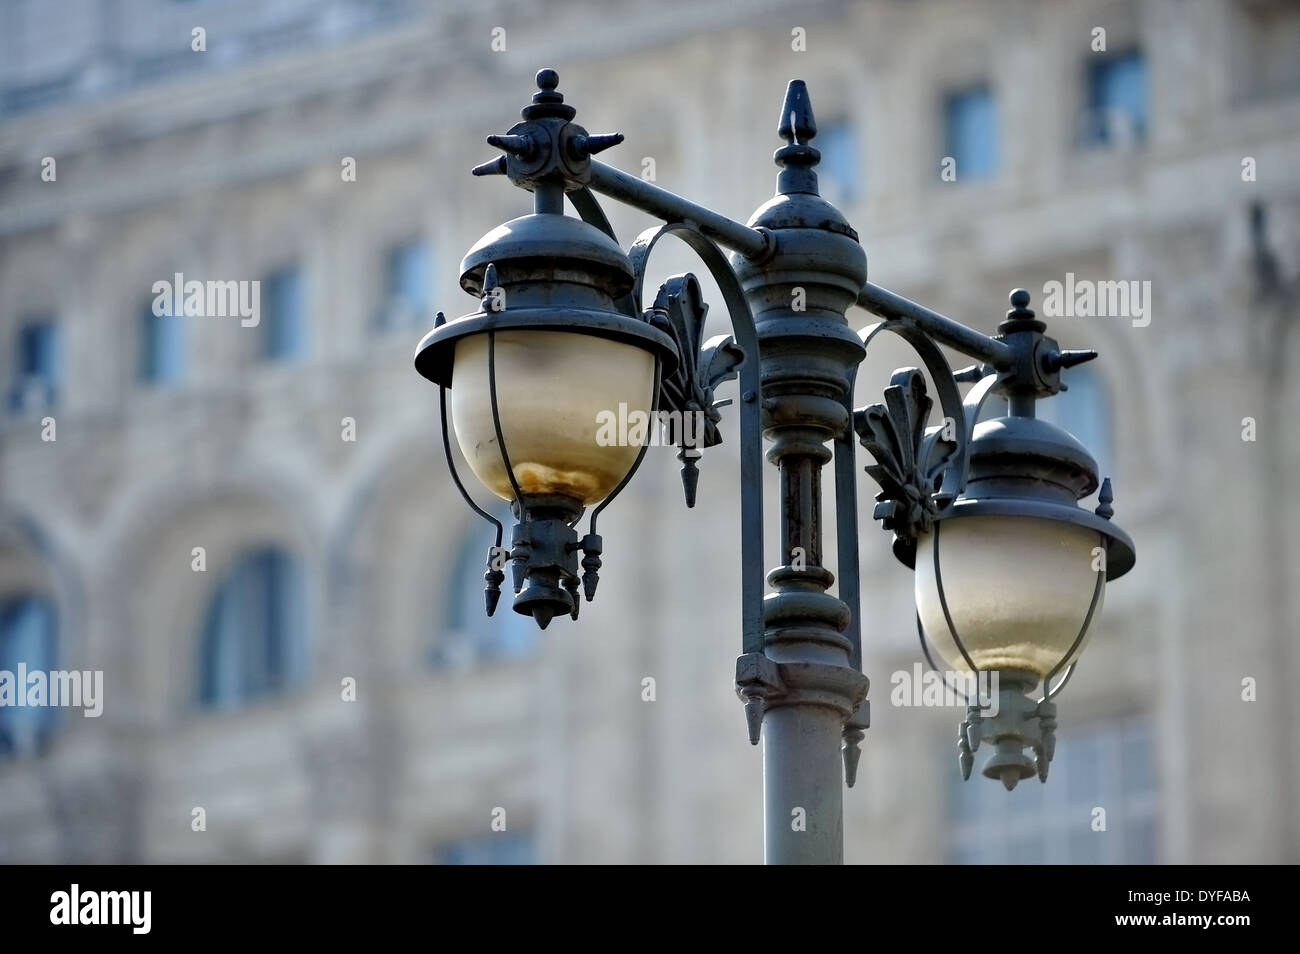 Outdoor public lighting pole with building on background Stock Photo